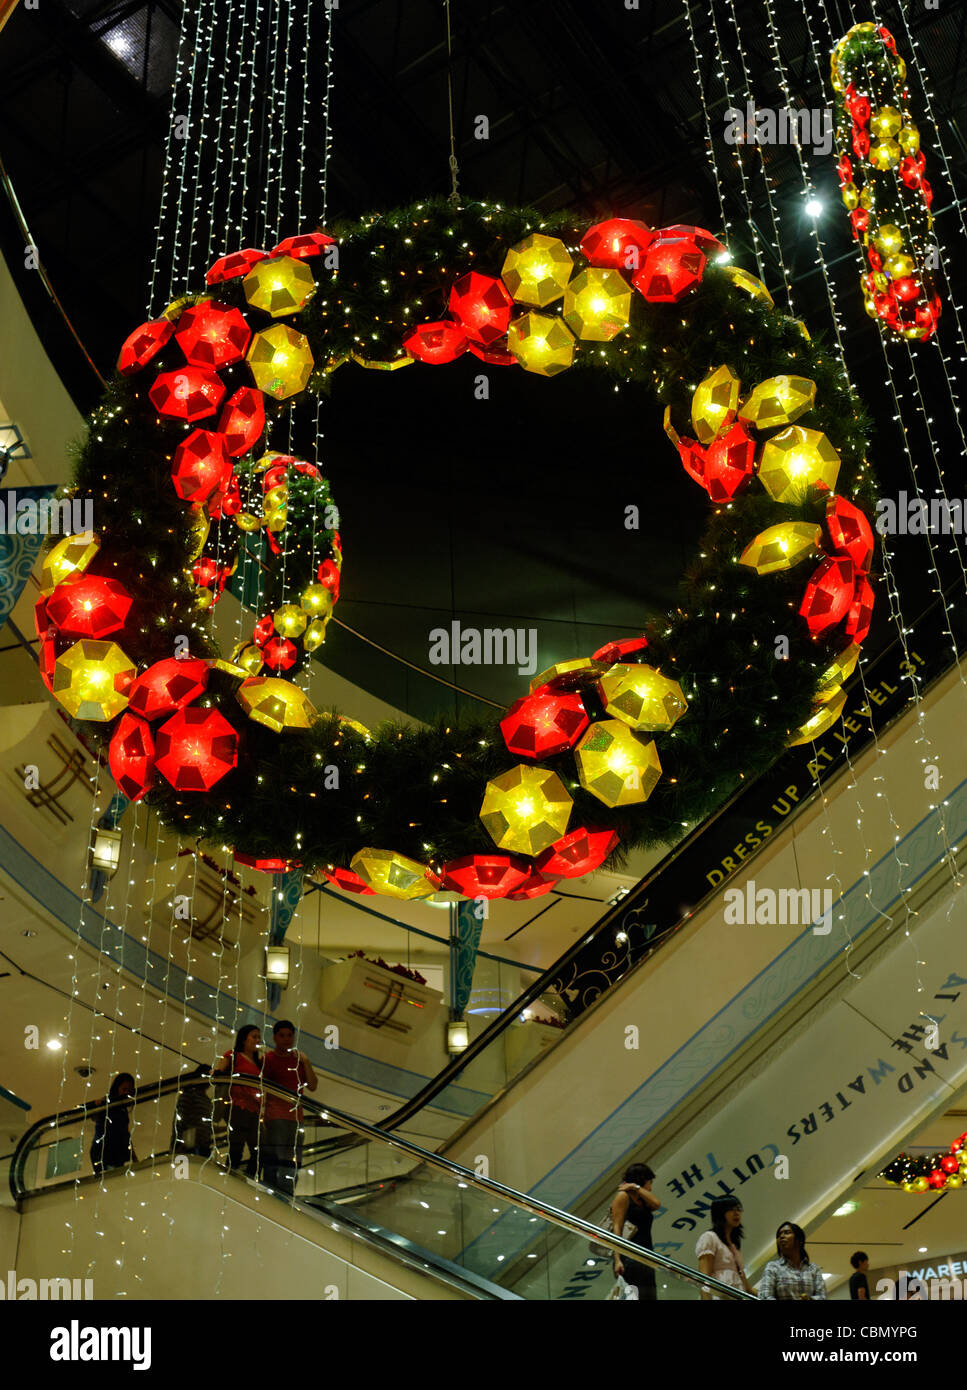 Illuminated Christmas garlands form the decorations for Raffles City shopping mall in Singapore Stock Photo